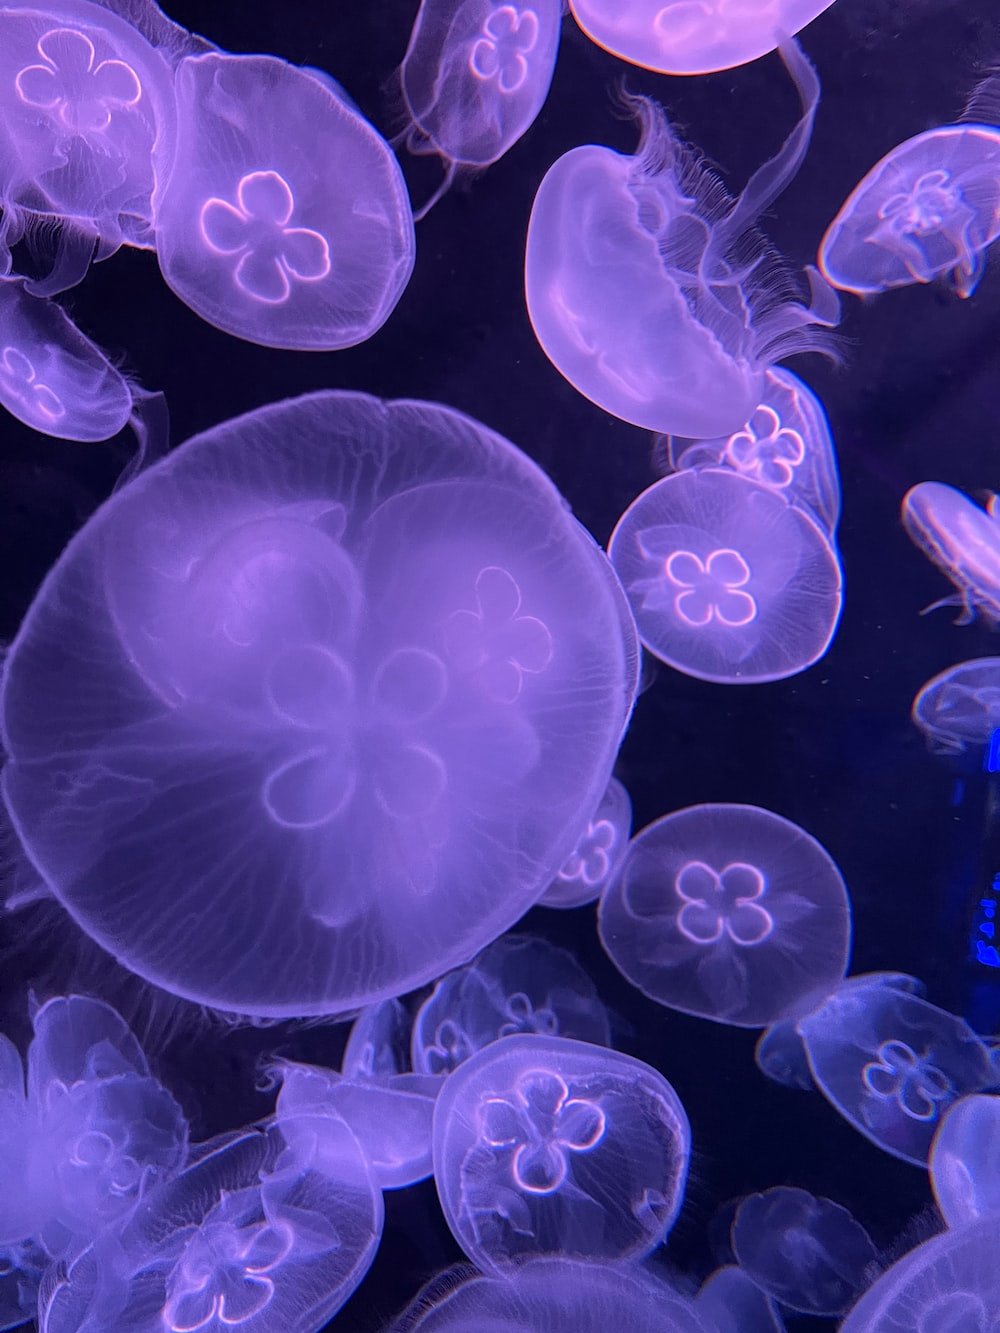 Purple Jellyfish Picture. Download Free Image